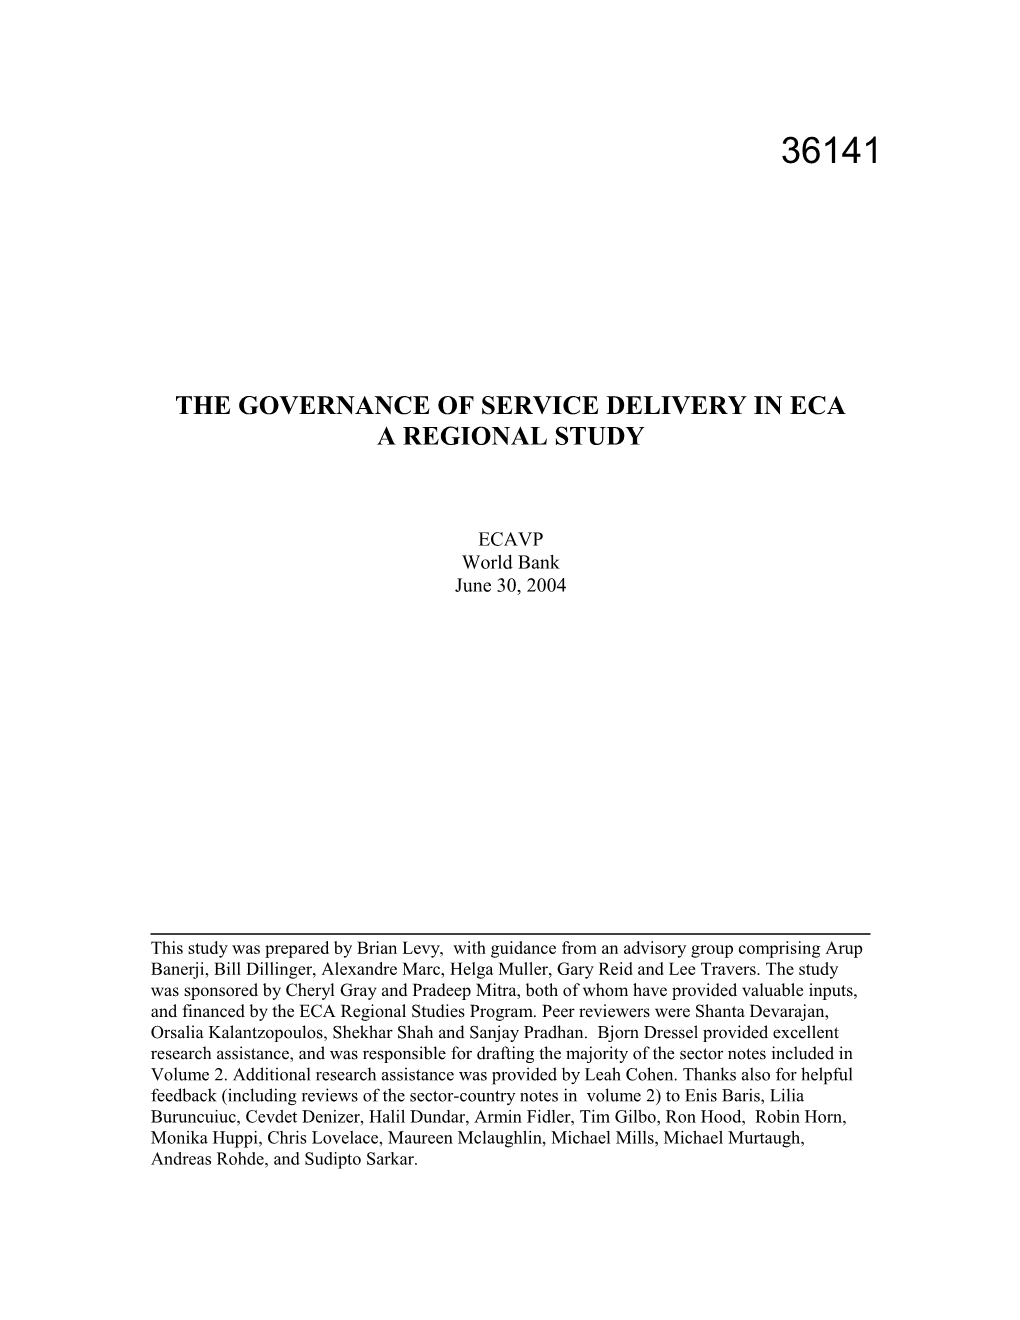 Iii: the Governance of Service Delivery